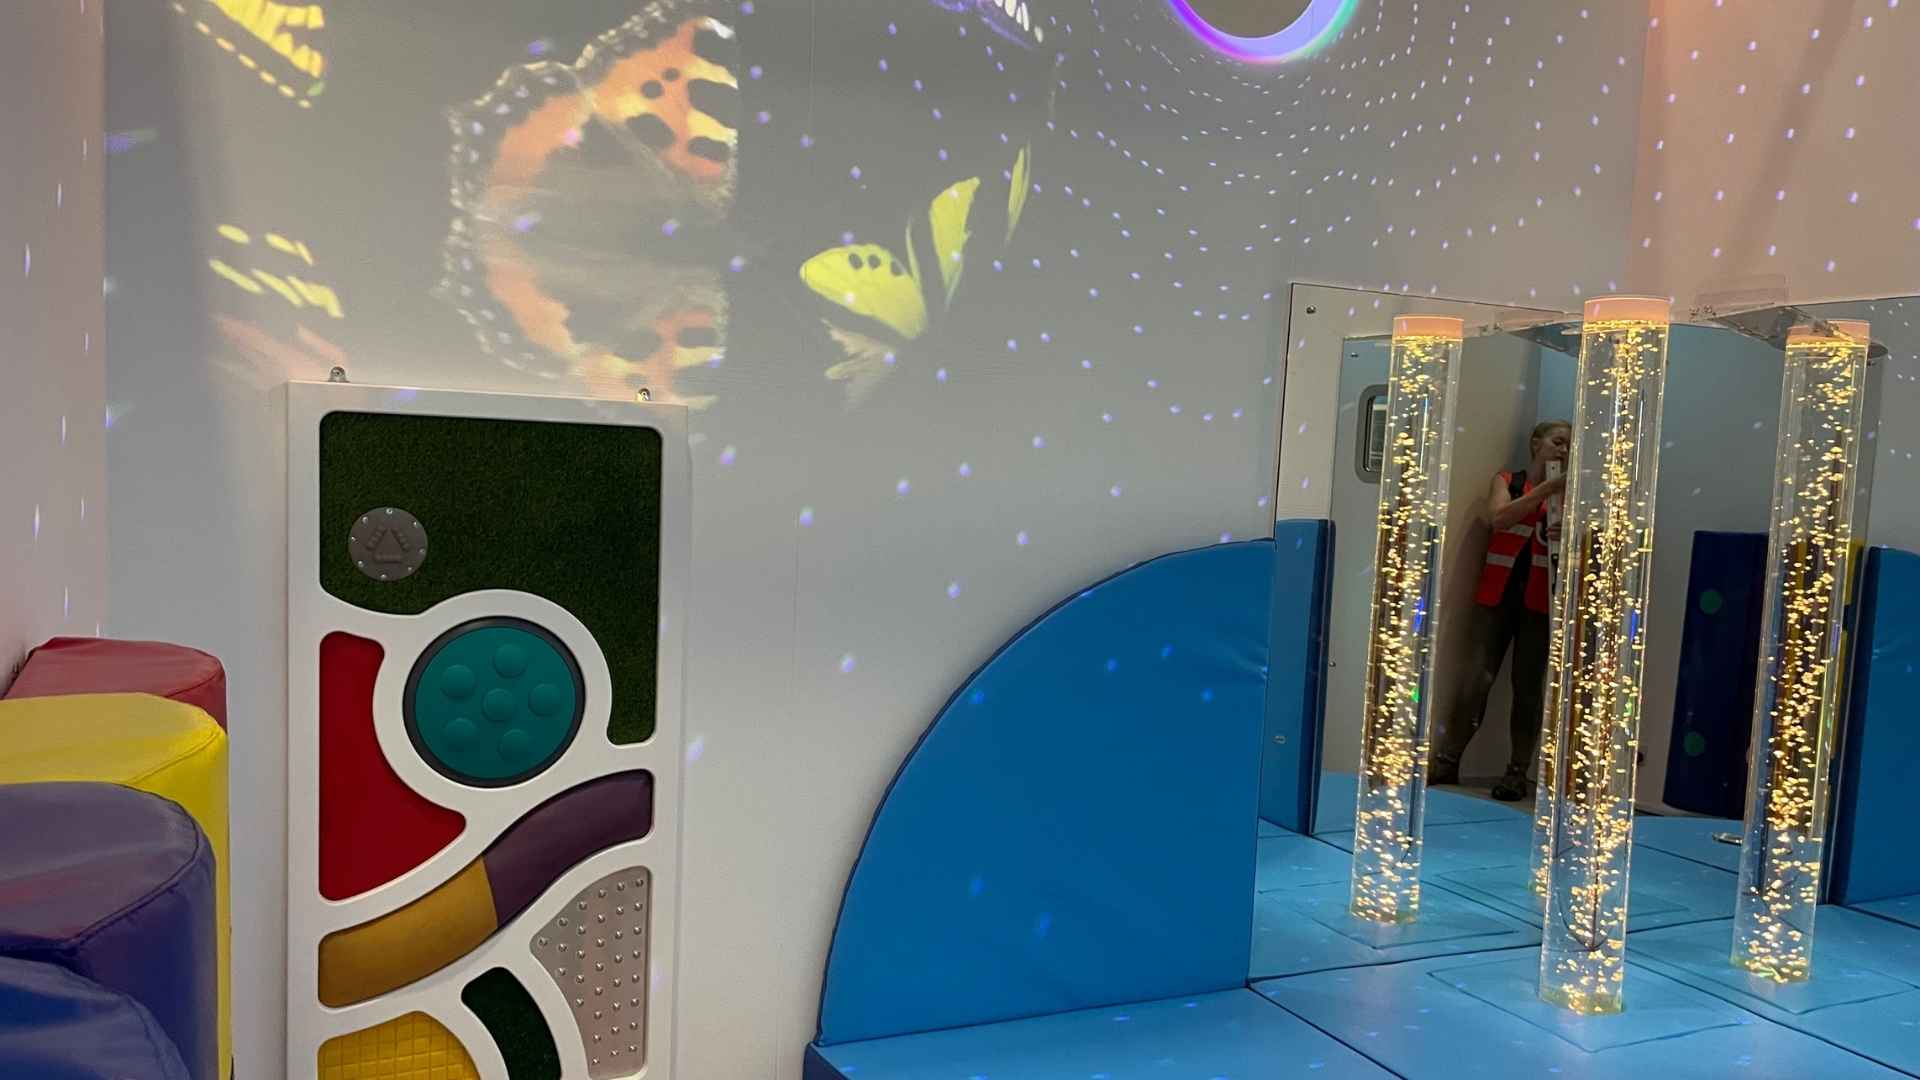 sensory room display at dimh in coventry